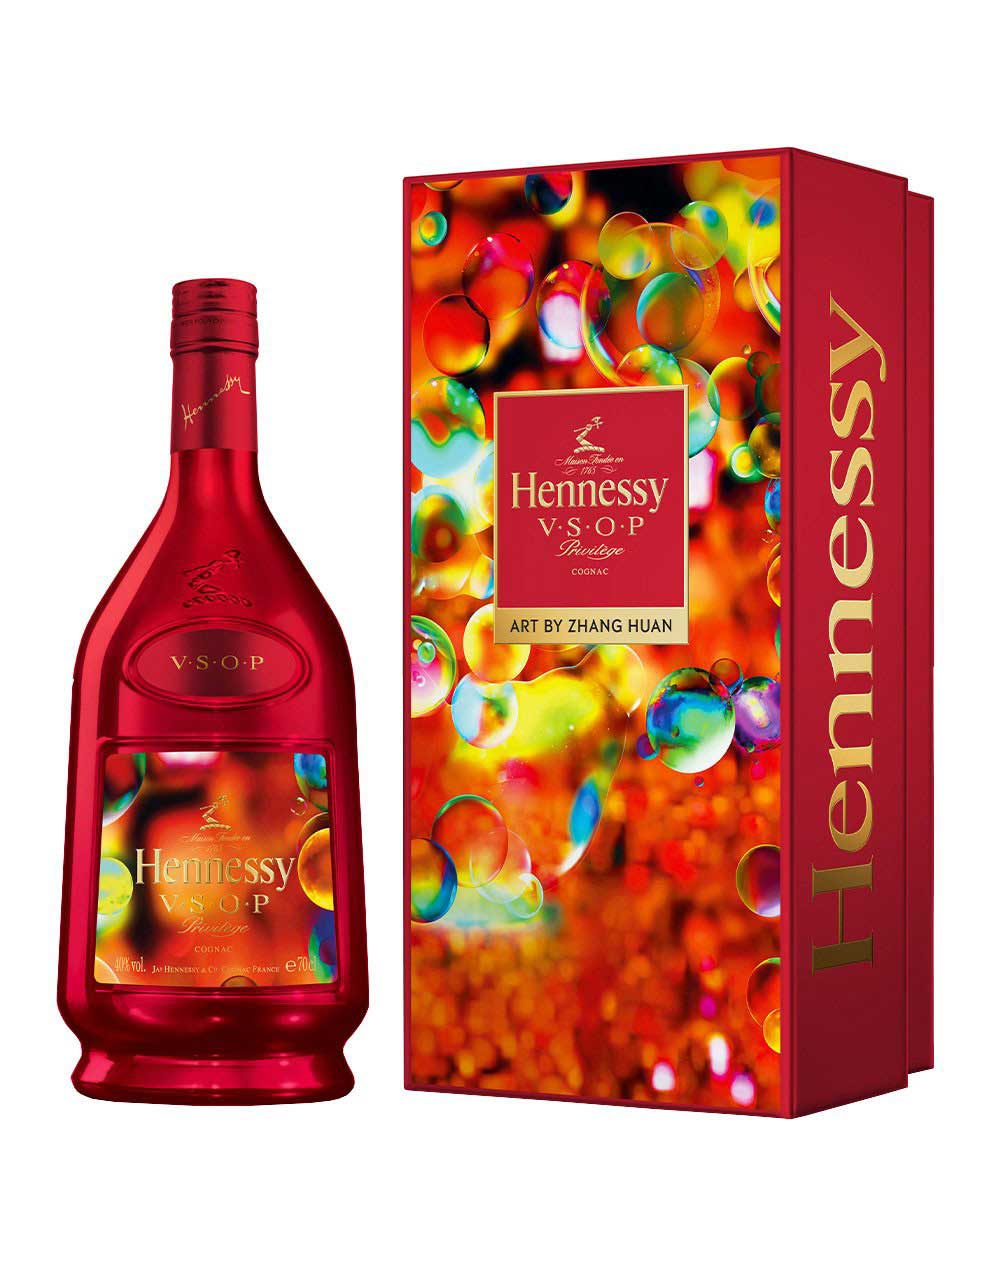 Hennessy V.S.O.P Privilage Chinese New Year Limited Edition Bottle